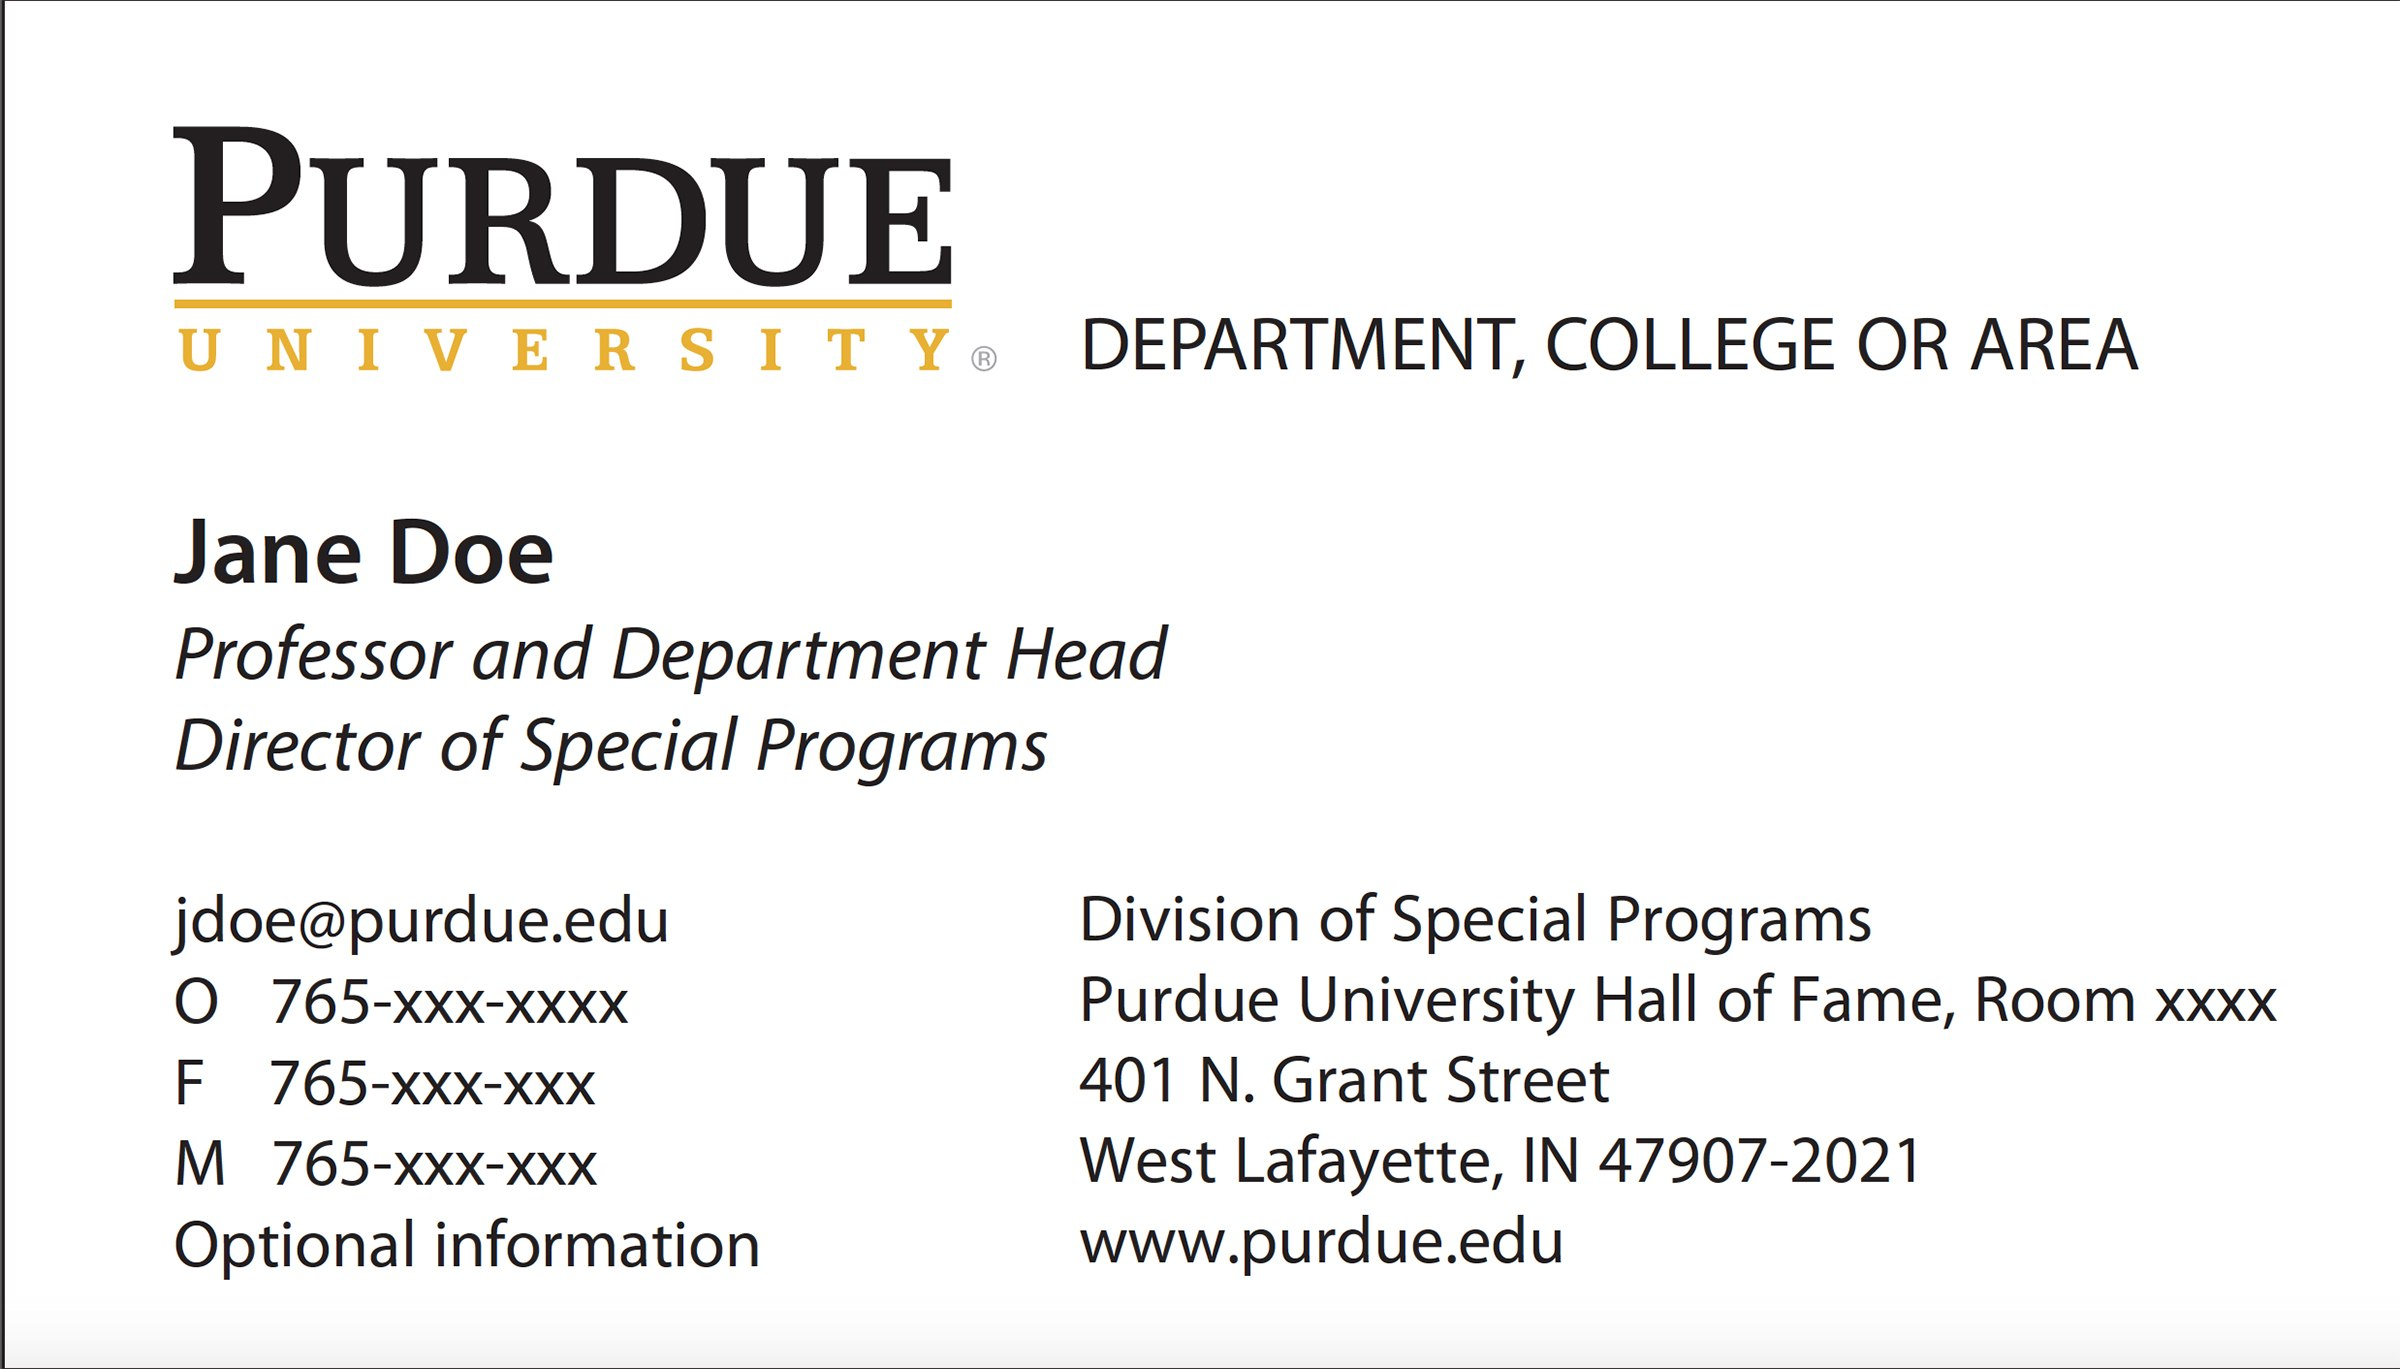 New Business Card Template Now Online  Purdue University News with Student Business Card Template